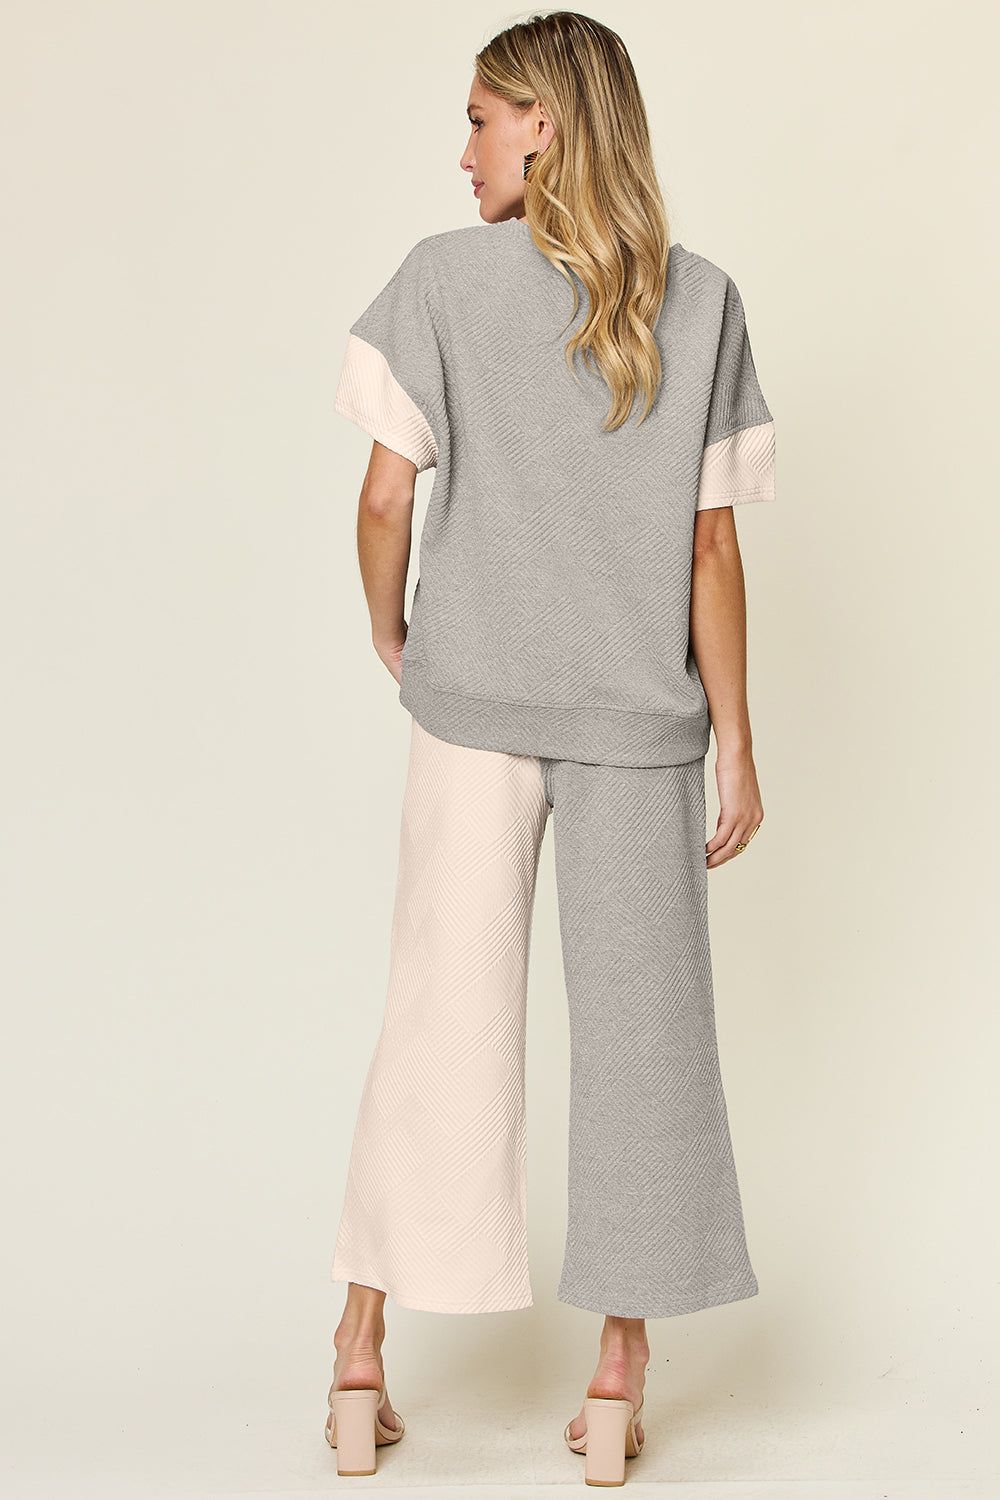 Double Take Texture Contrast T-Shirt and Wide Leg Pants Set